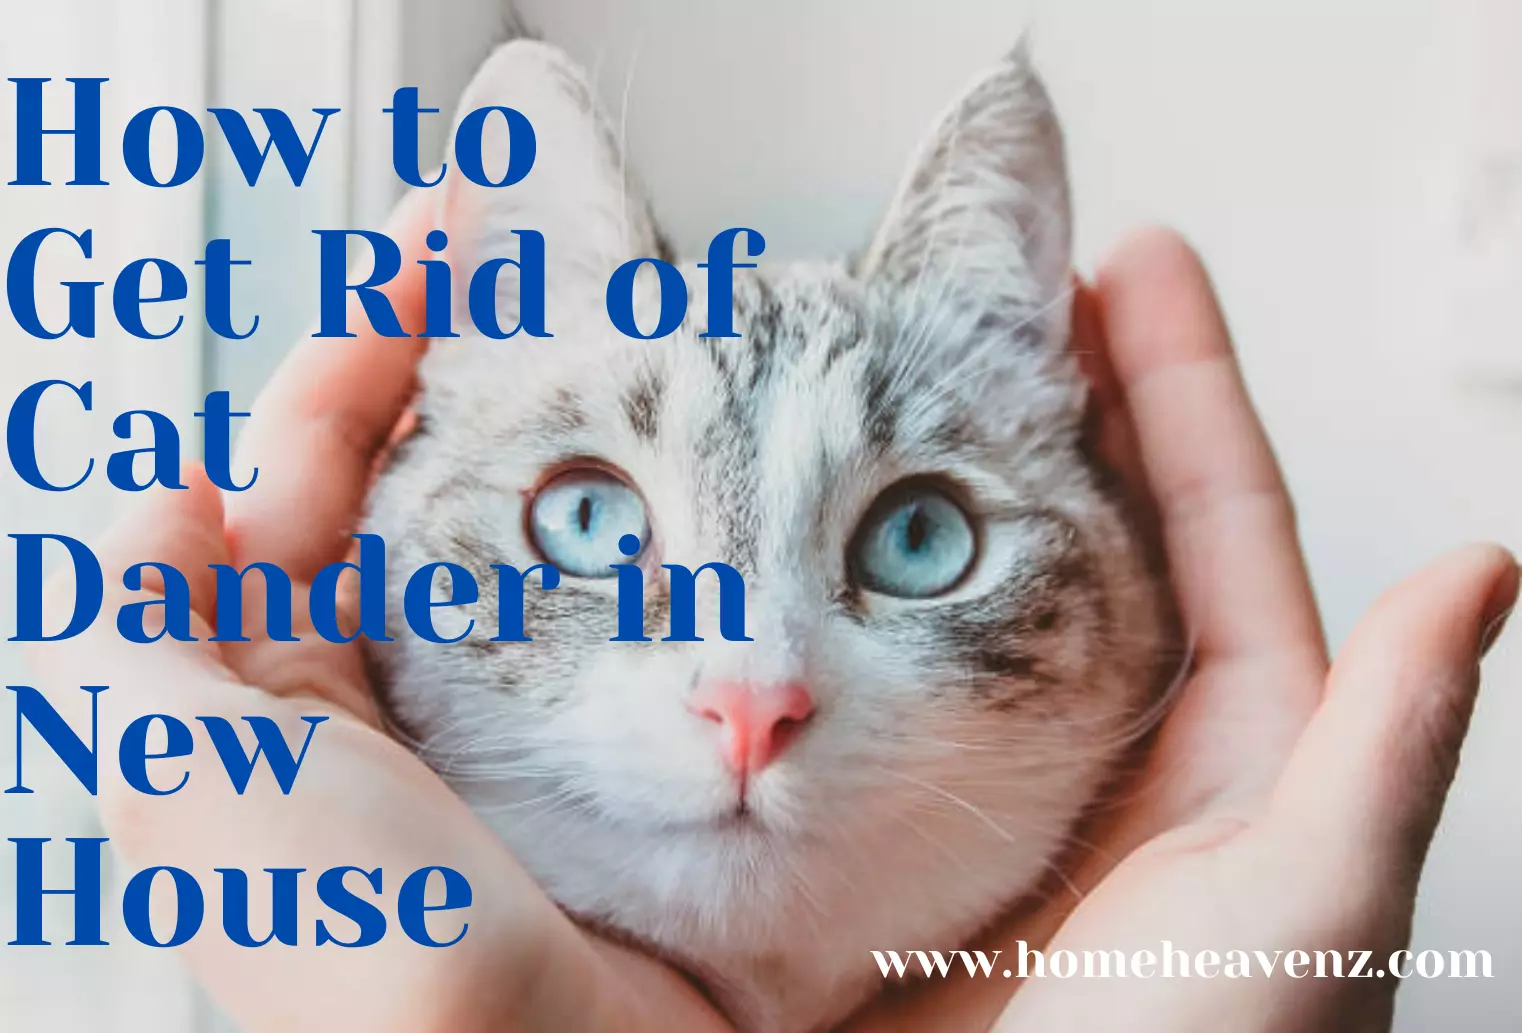 How to Get Rid of Cat Dander in New House